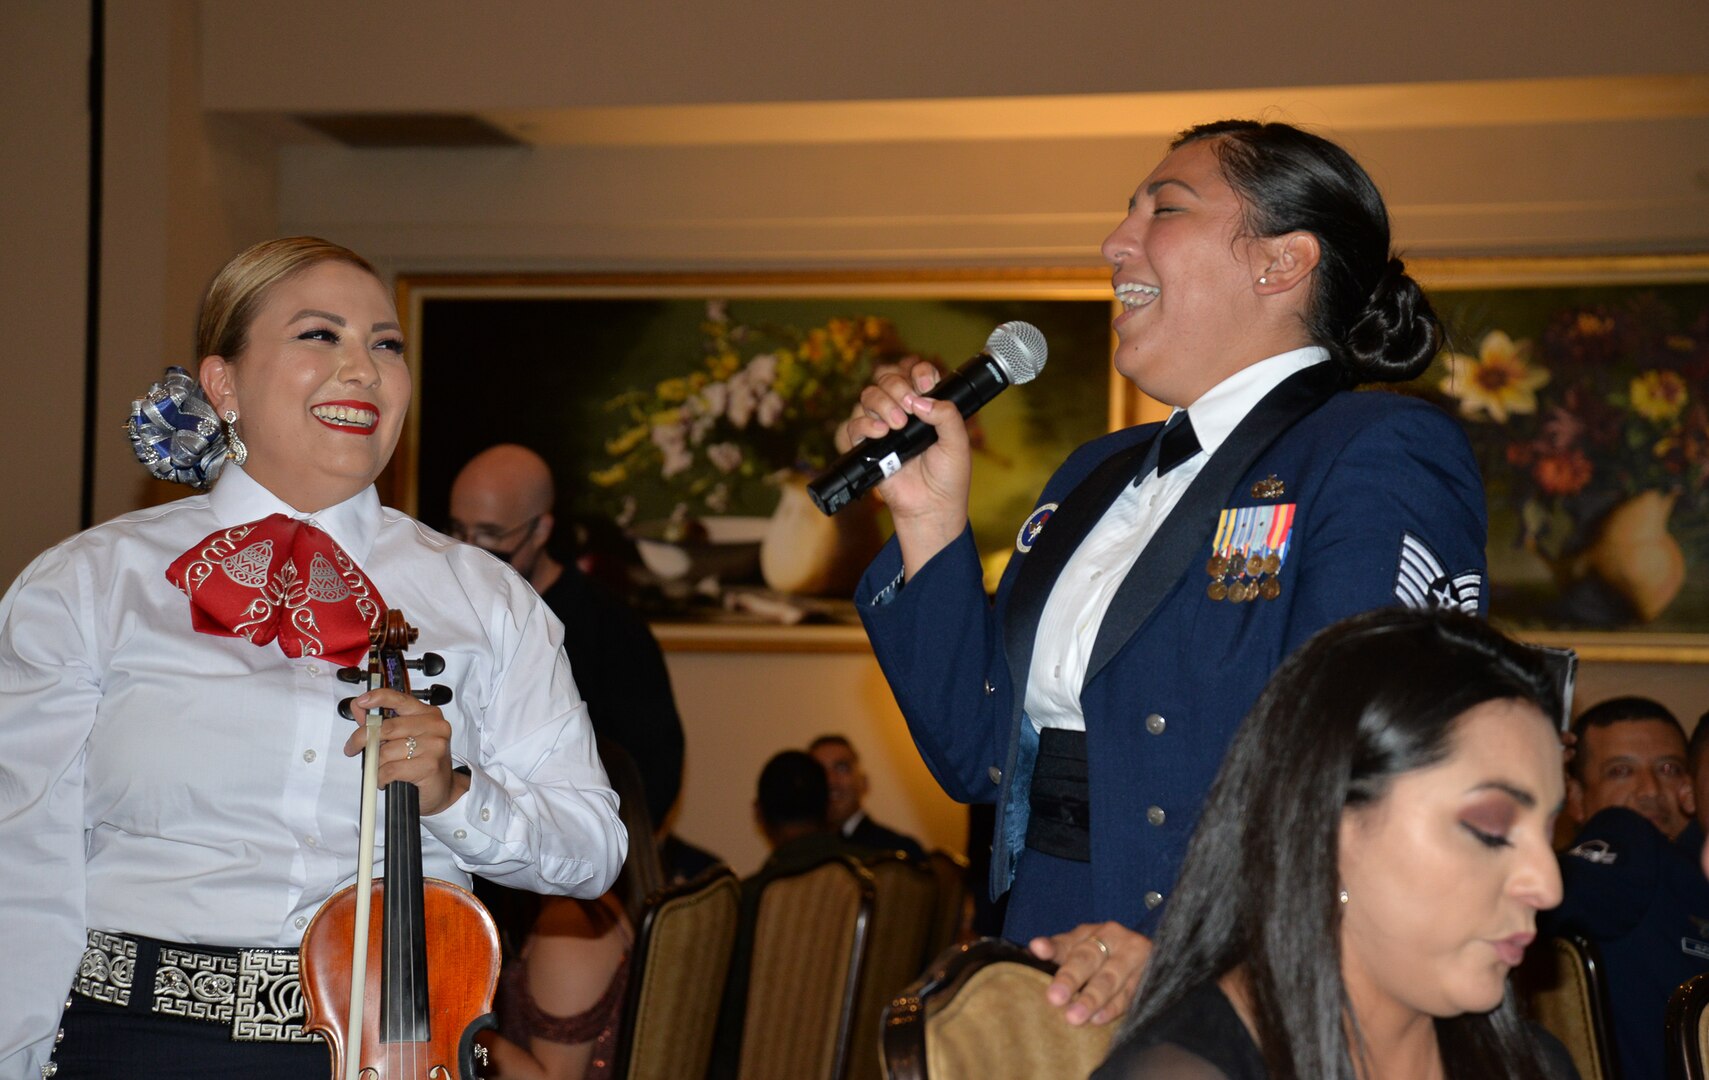 Tech Sgt. holds mike and sings while mariachi group member smiles.